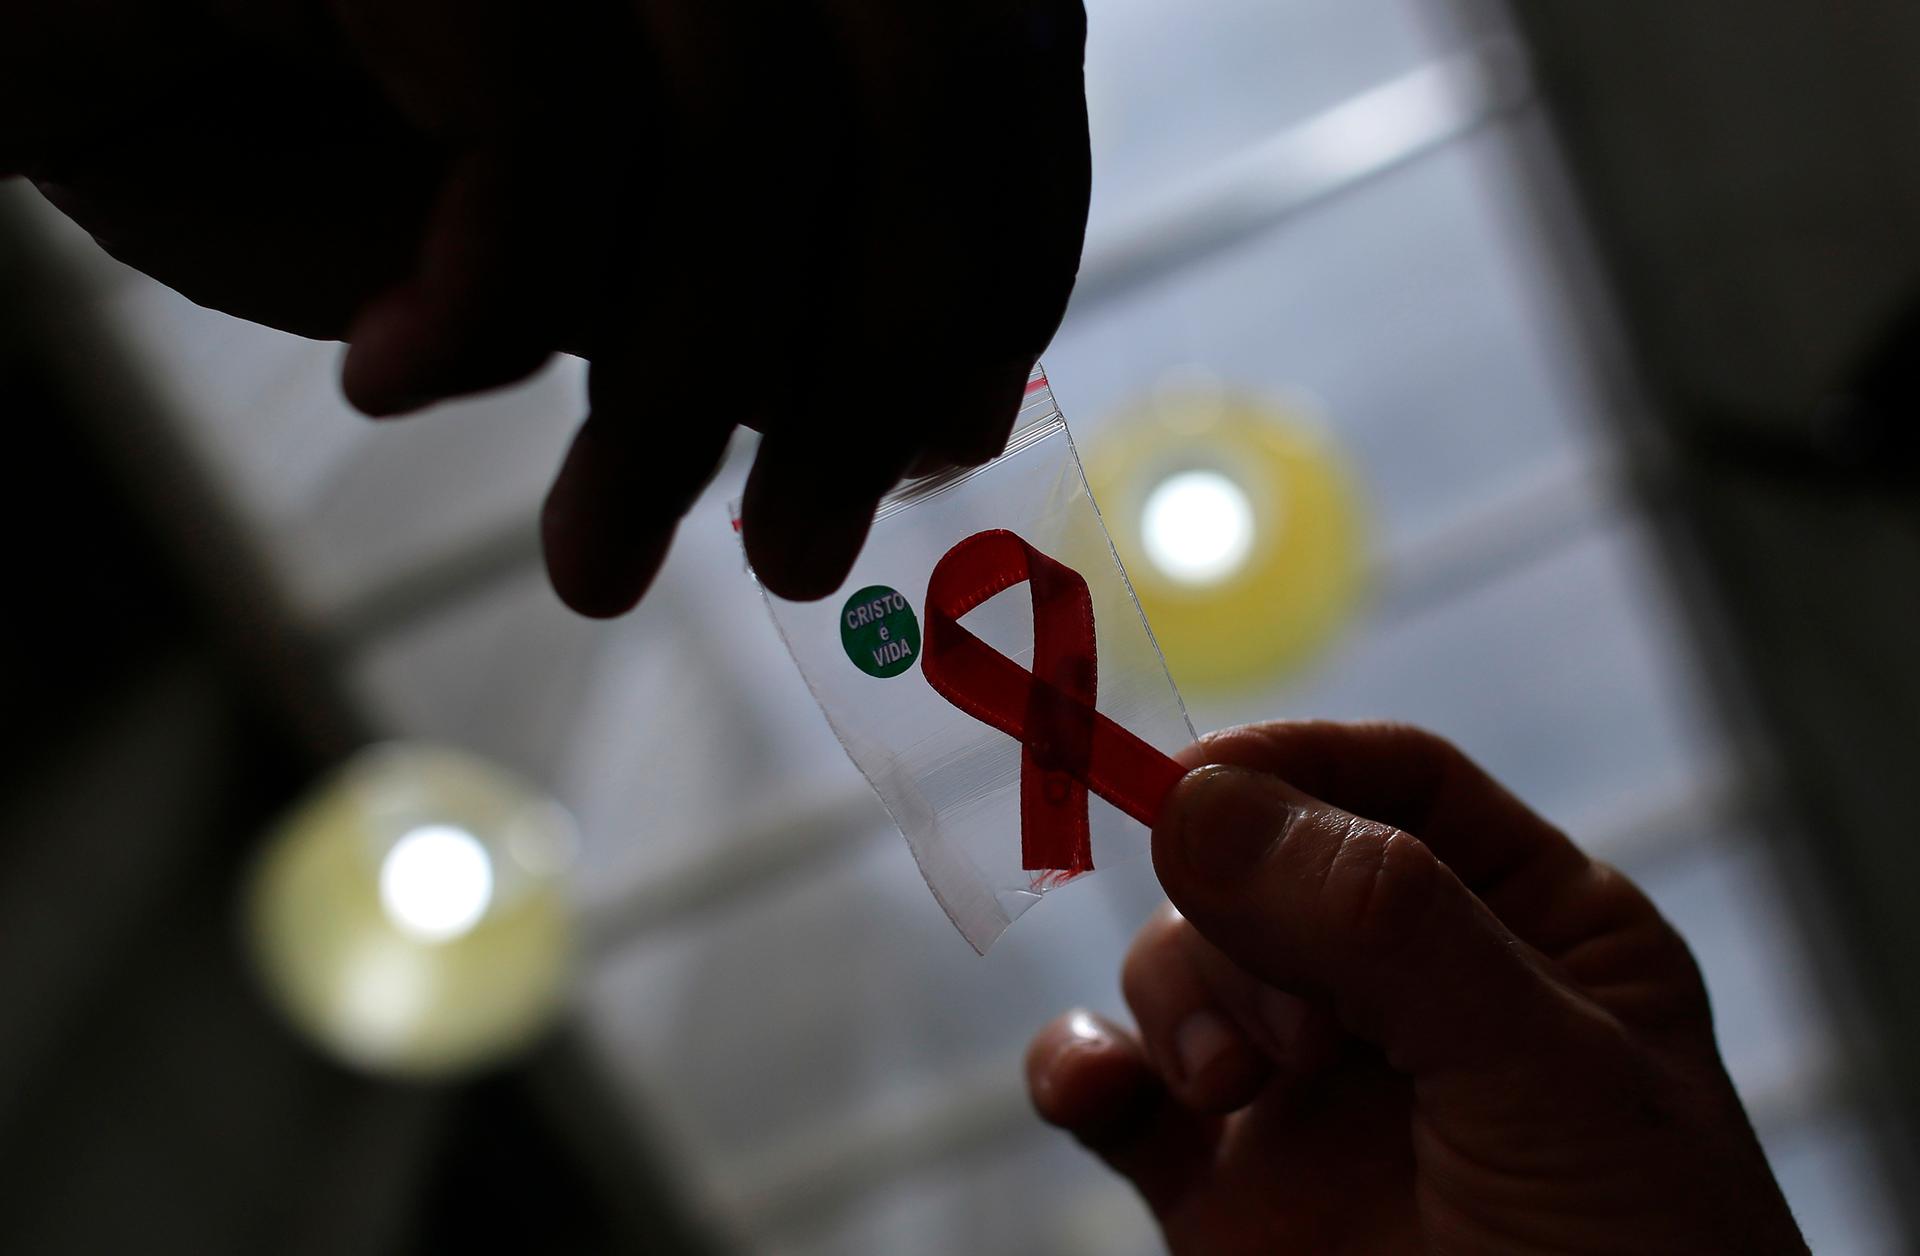 A nurse hands out a red ribbon to a woman, to mark World AIDS Day, at the entrance of Emilio Ribas Hospital, in Sao Paulo December 1, 2014.